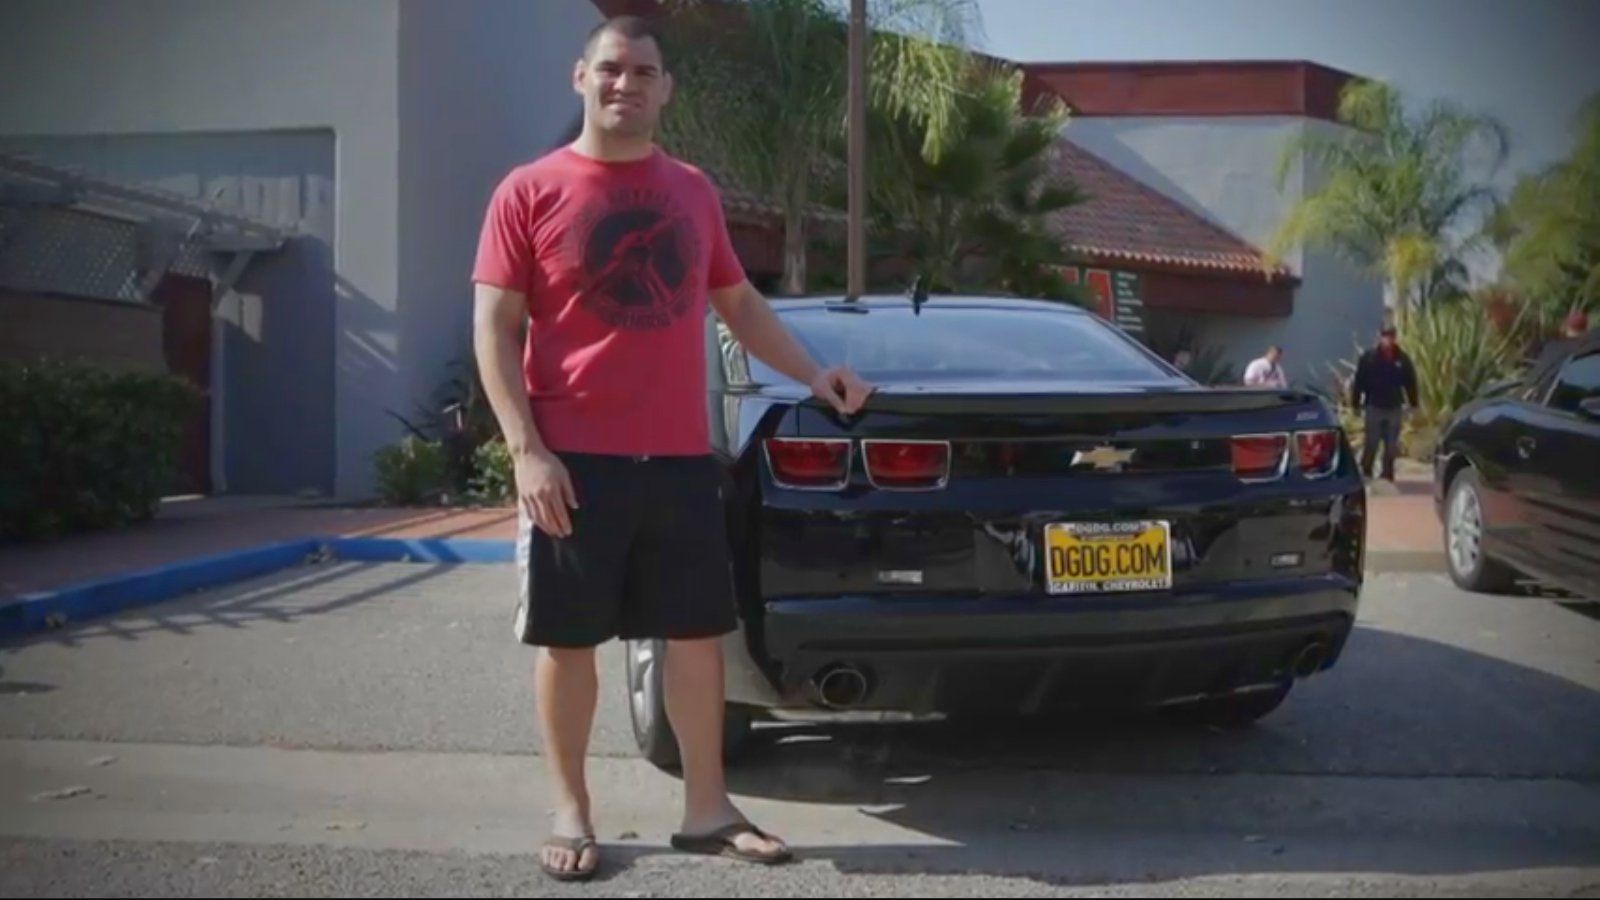 Perks of Being the Champ: MMA Fighter Cain Velasquez Given Camaro ...